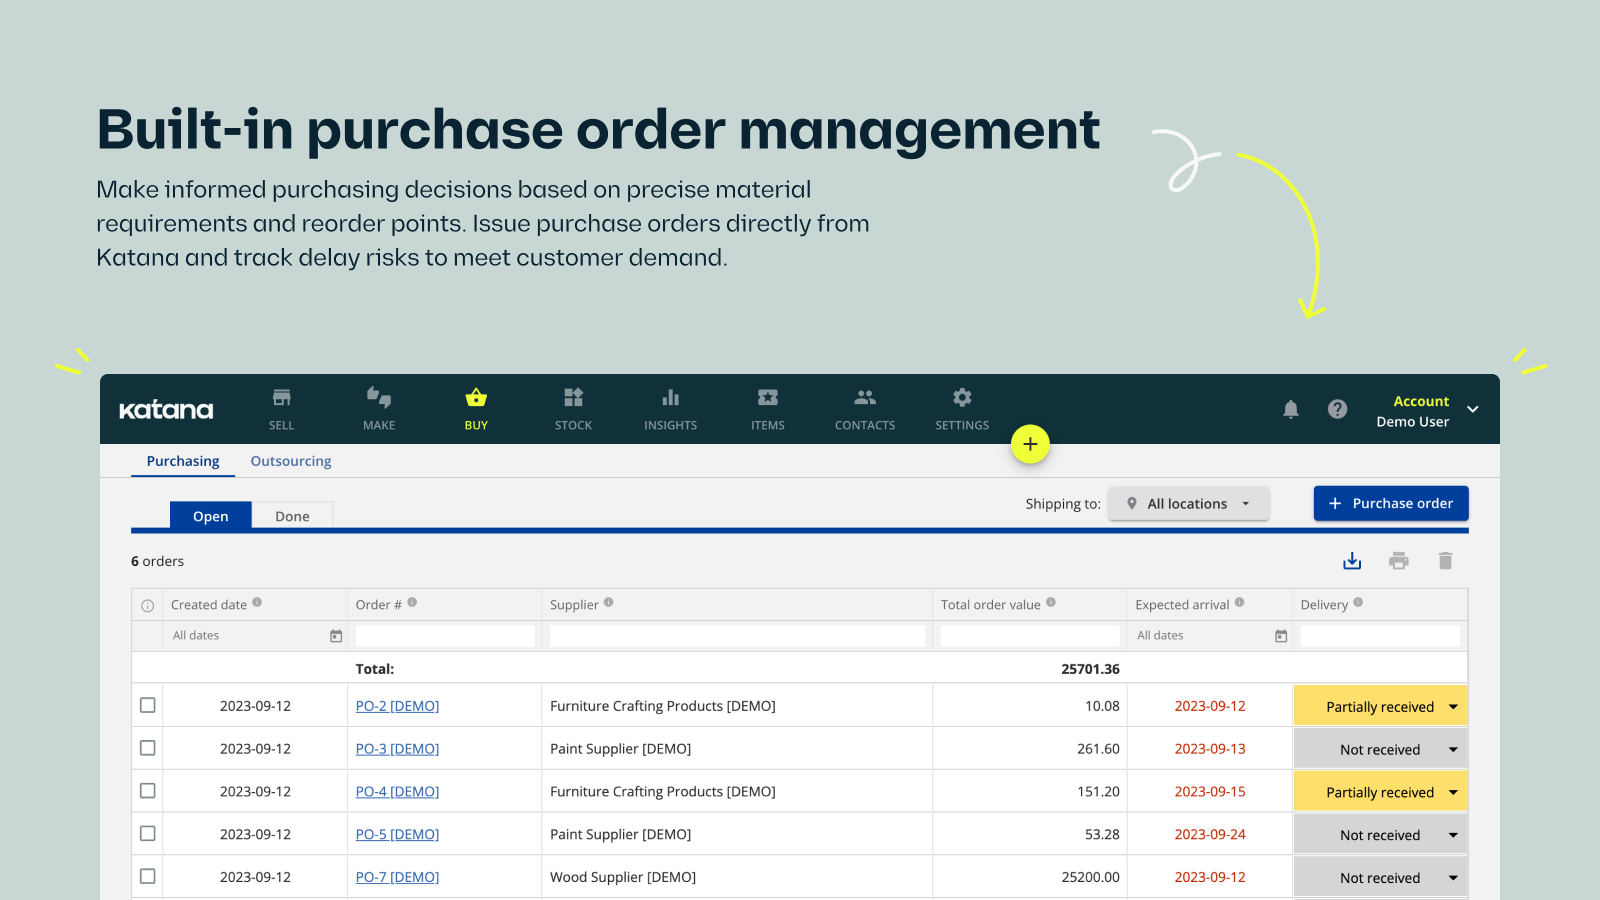 Purchase order management with reorder points and materials